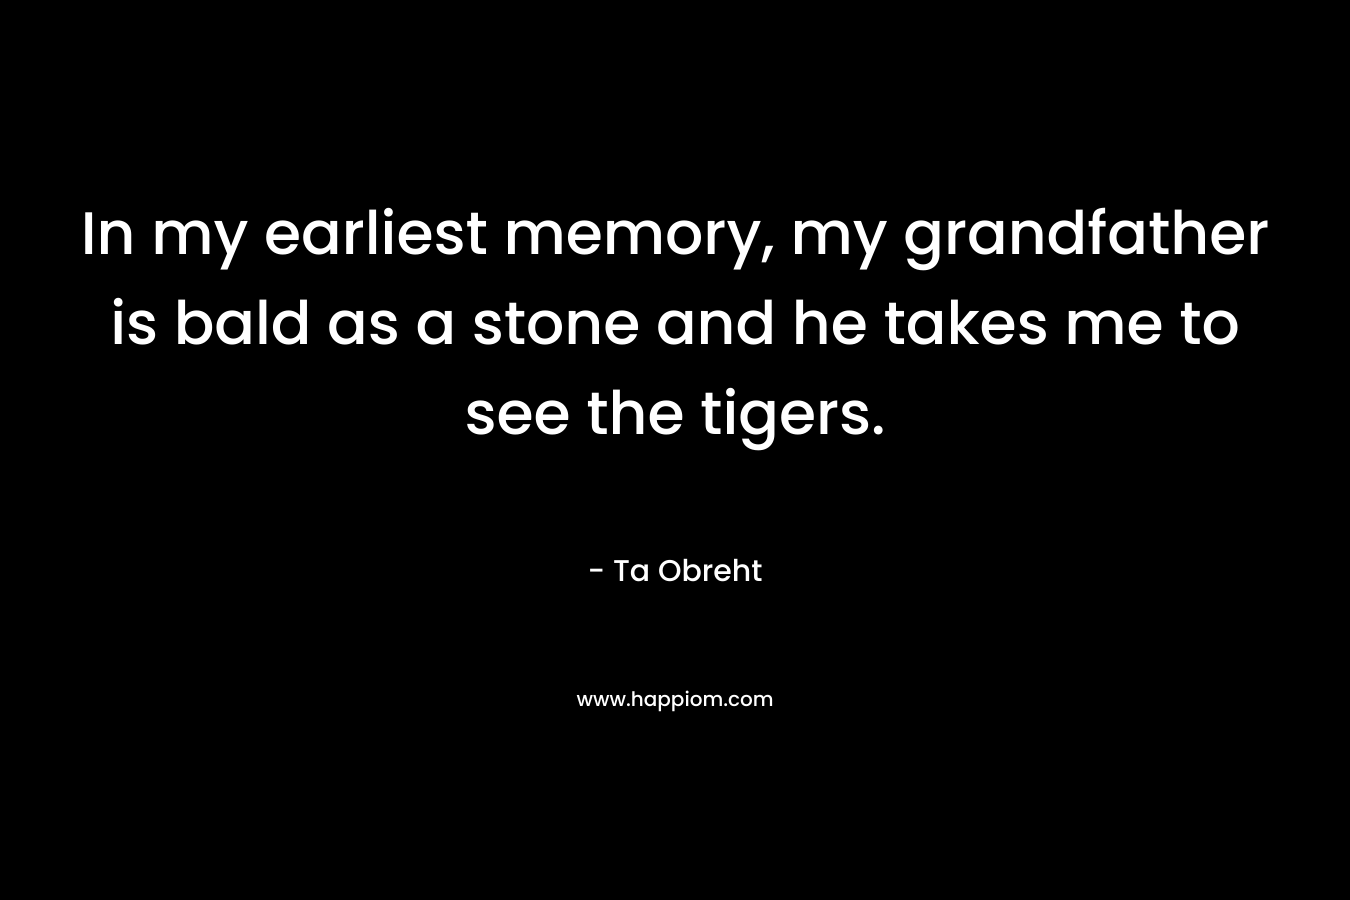 In my earliest memory, my grandfather is bald as a stone and he takes me to see the tigers. – Ta Obreht